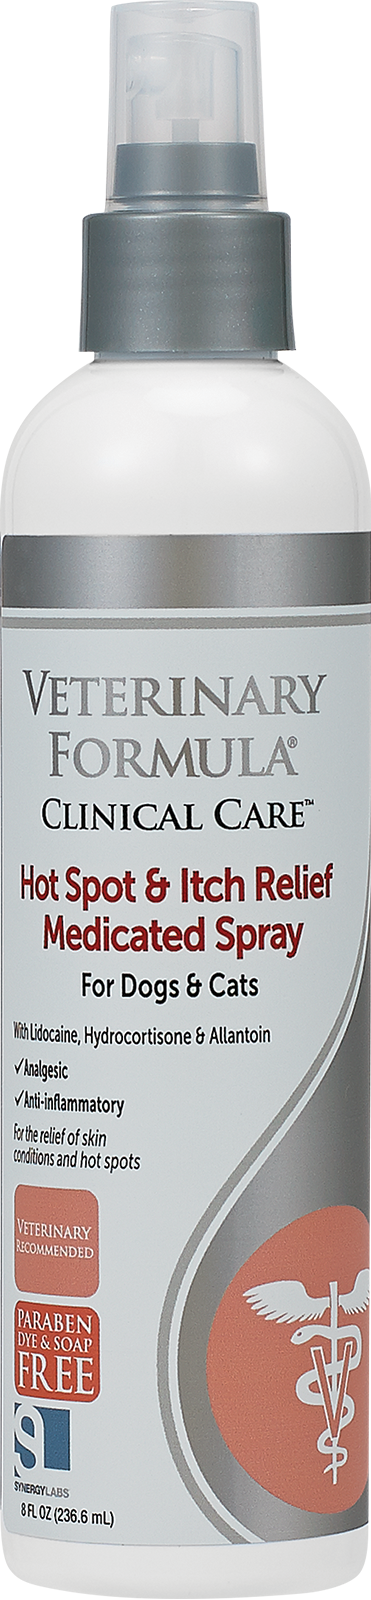 Hot Spot & Itch Relief Medicated Spray